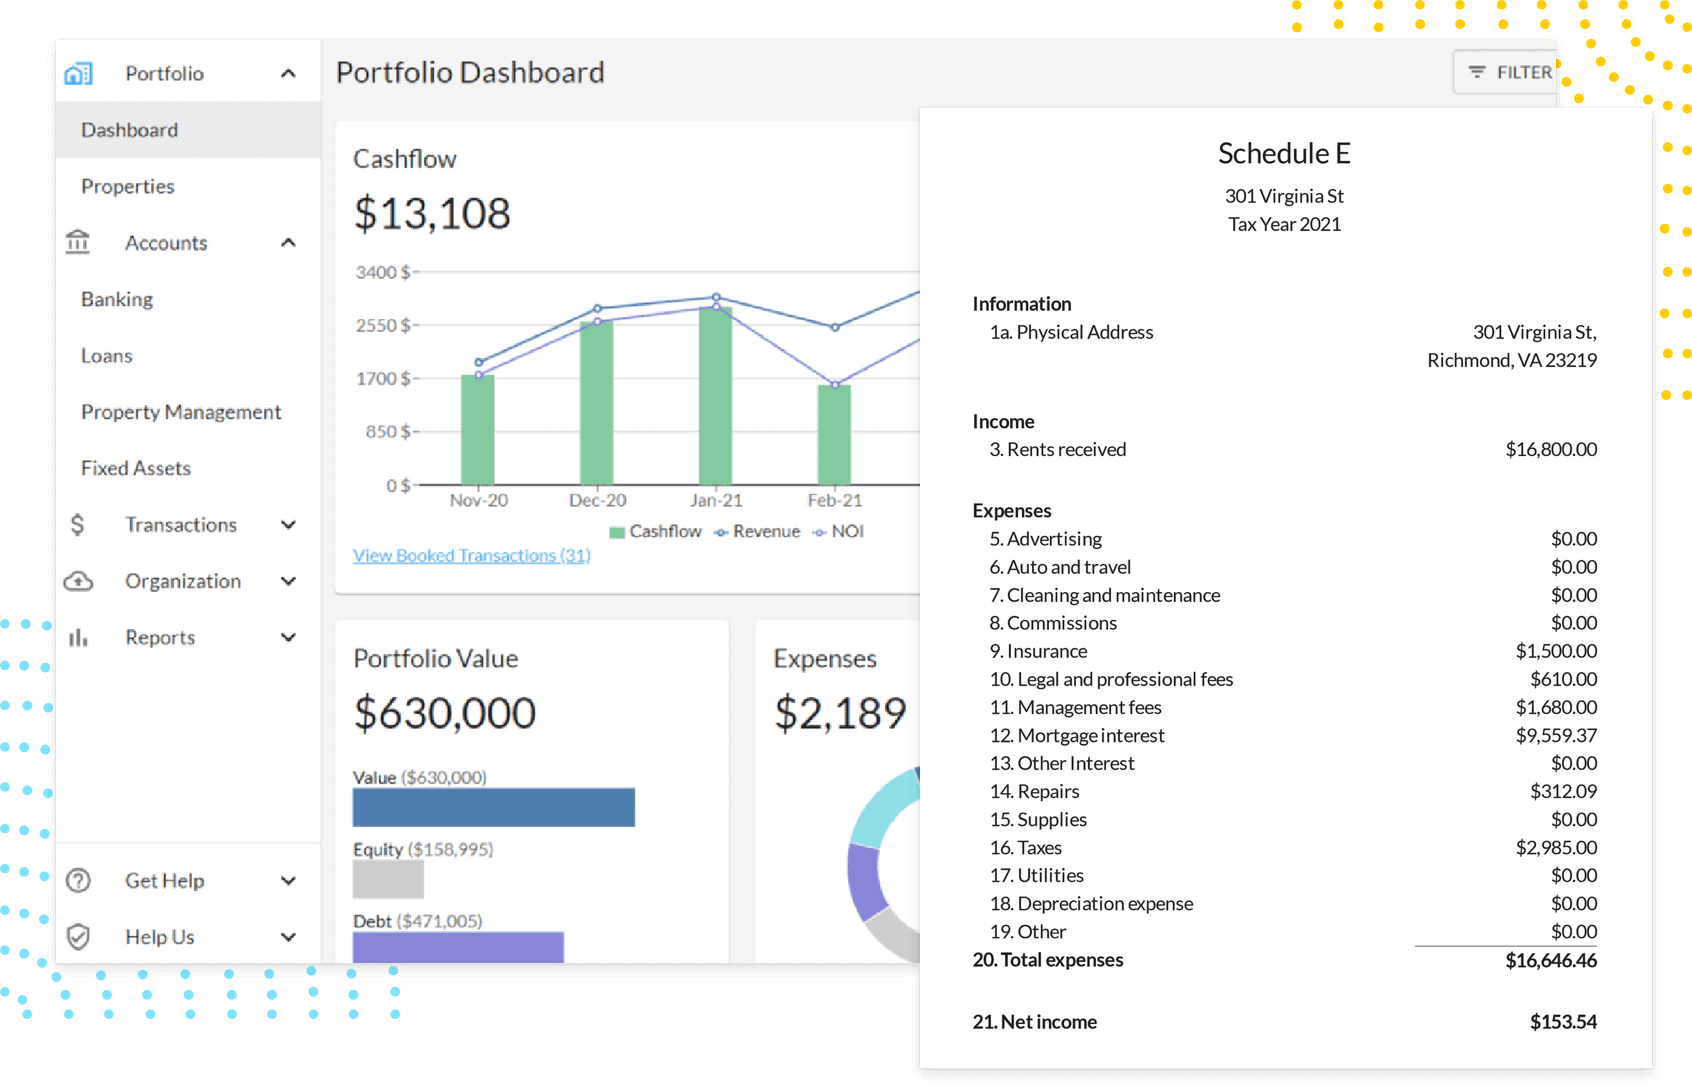 rental accounting dashboard view and schedule e report